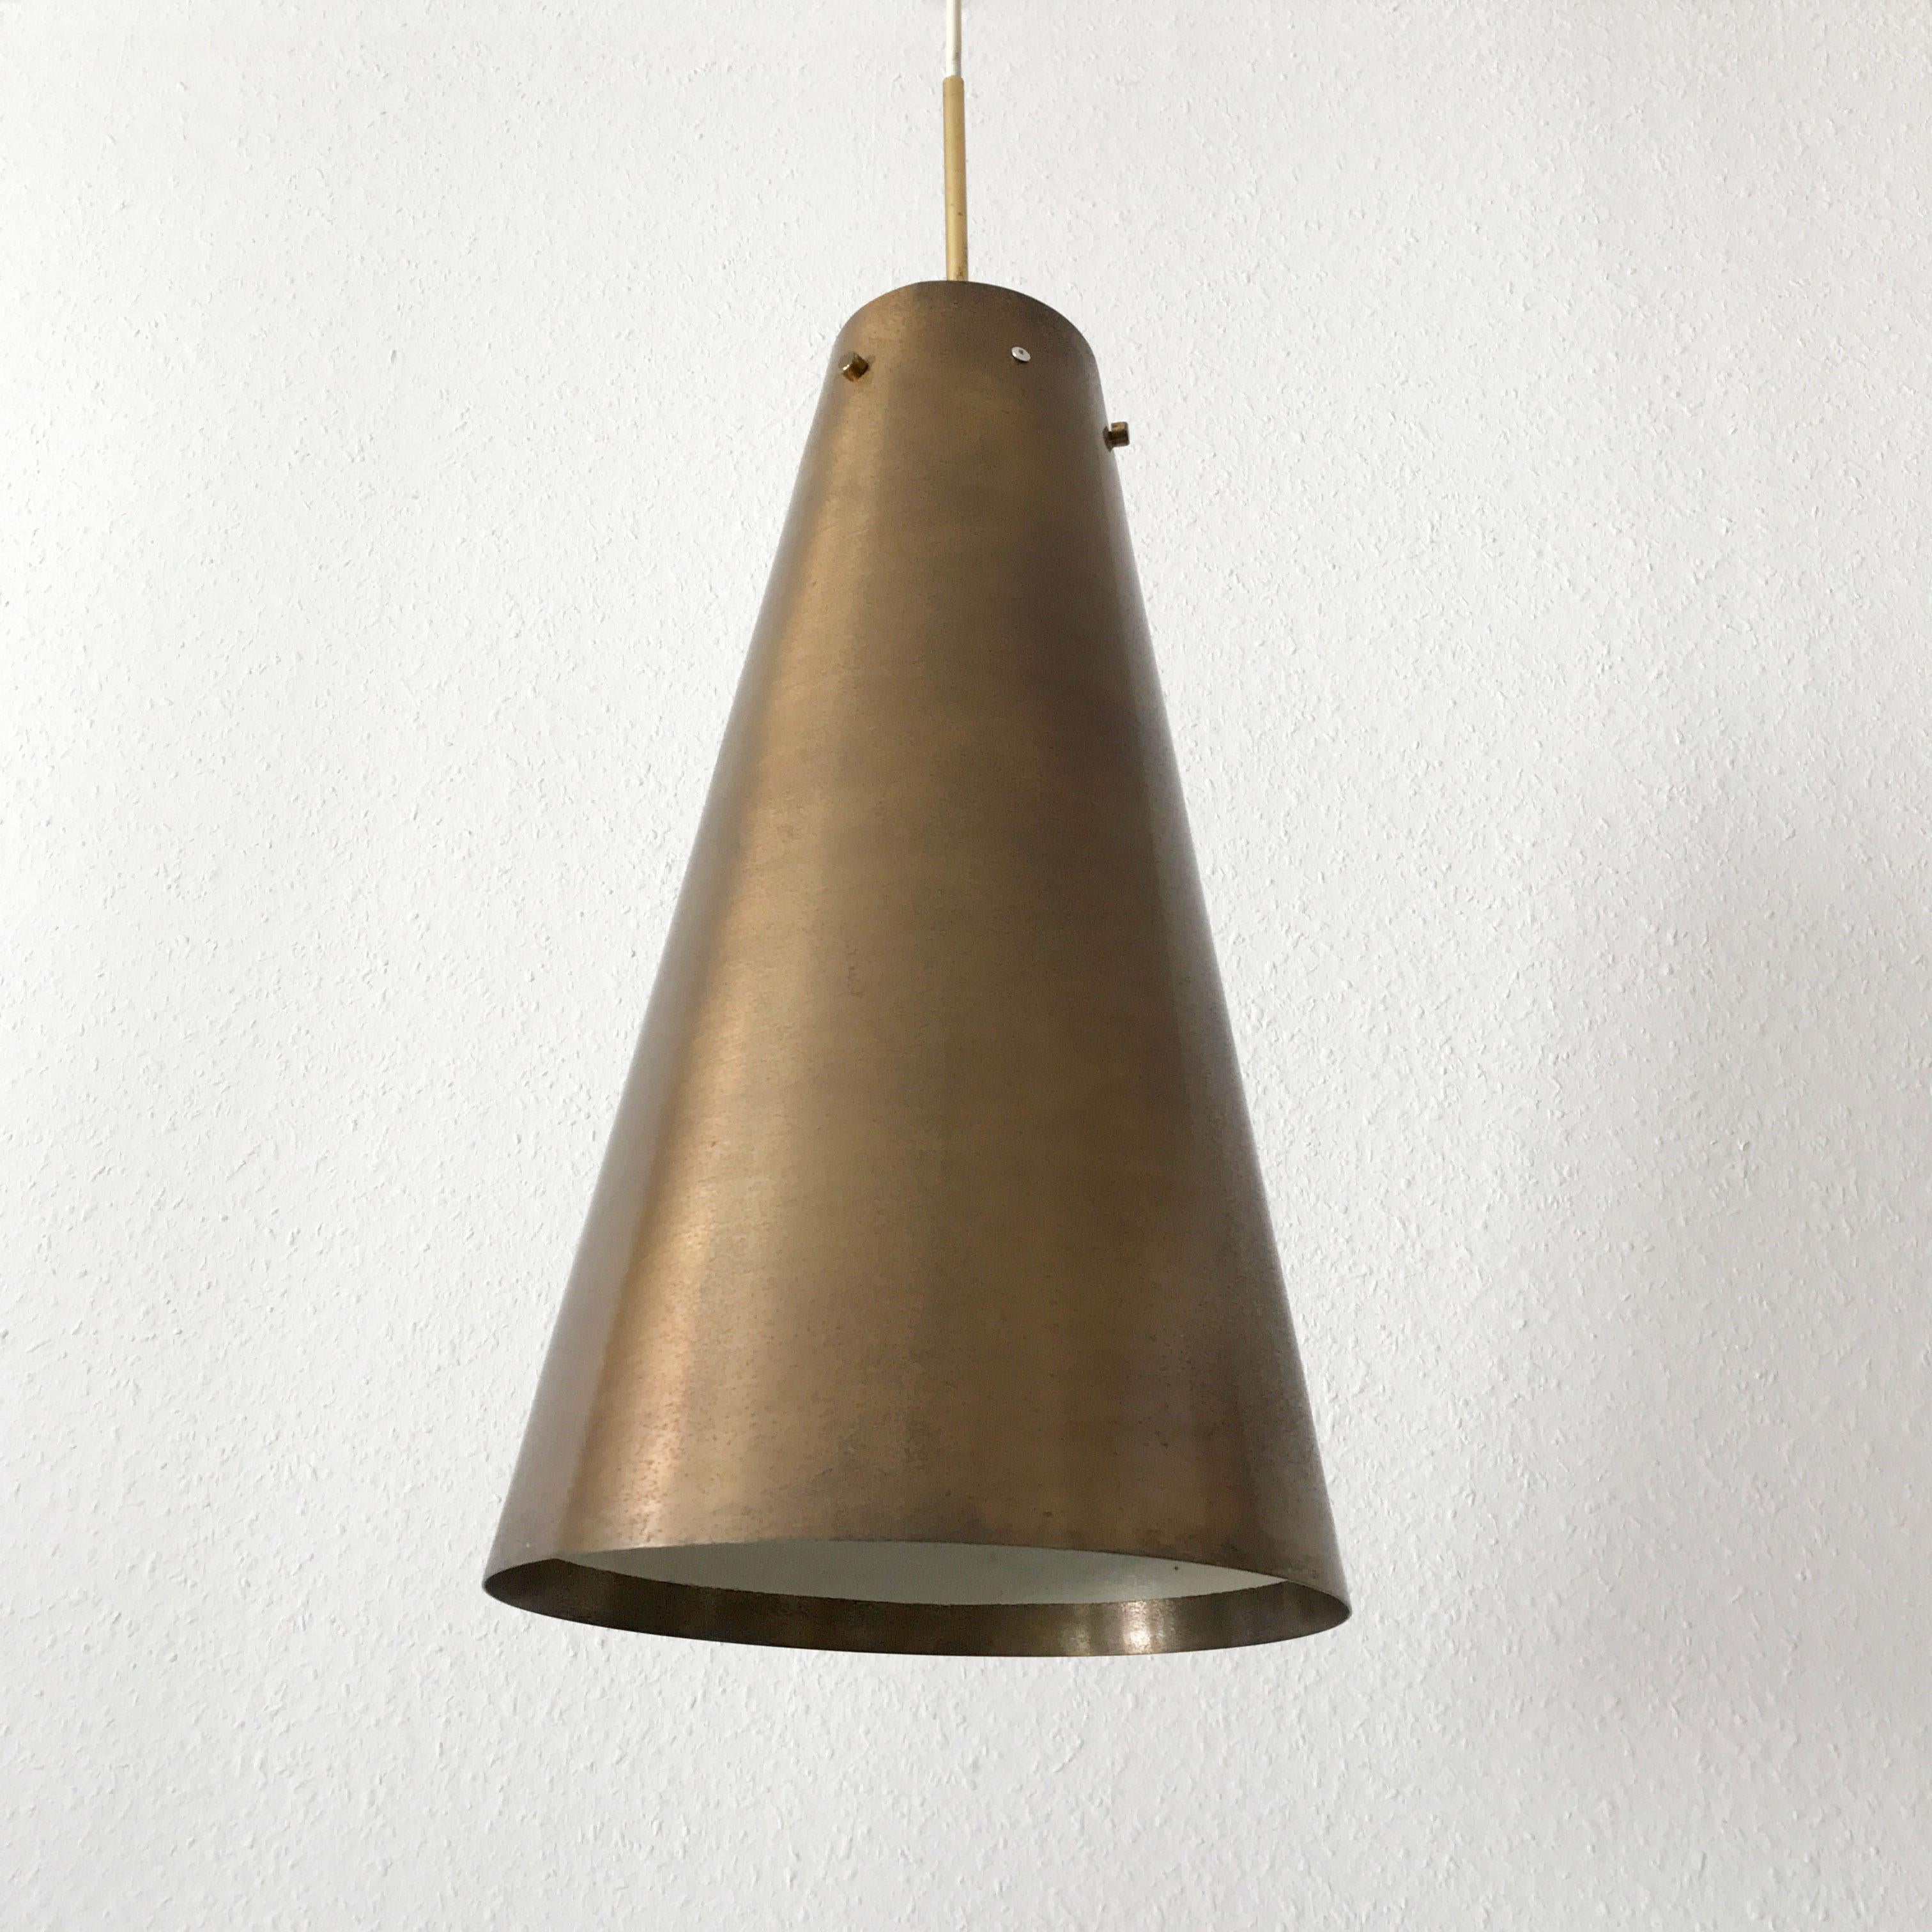 Rare and Large Mid-Century Modern Brass Pendant Lamp, 1950s, Germany 1